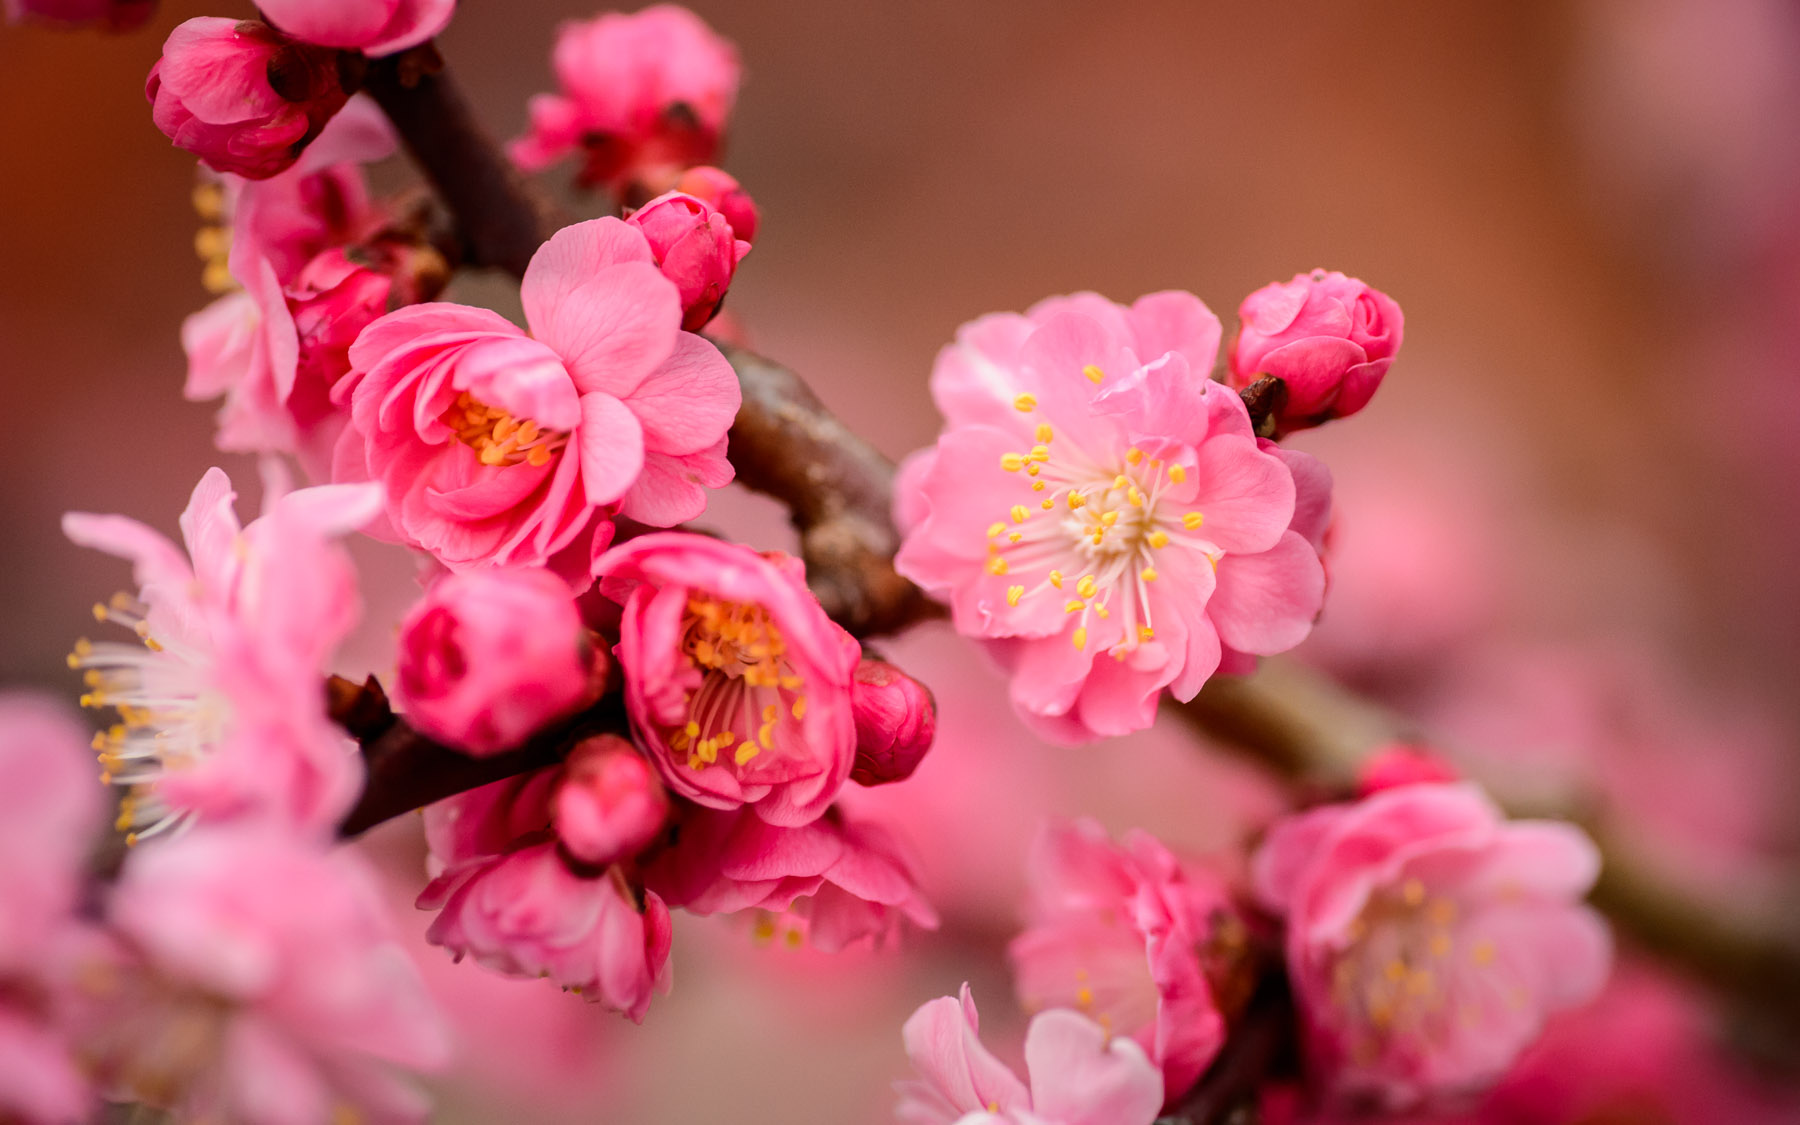 Amazing Blossom Pictures & Backgrounds